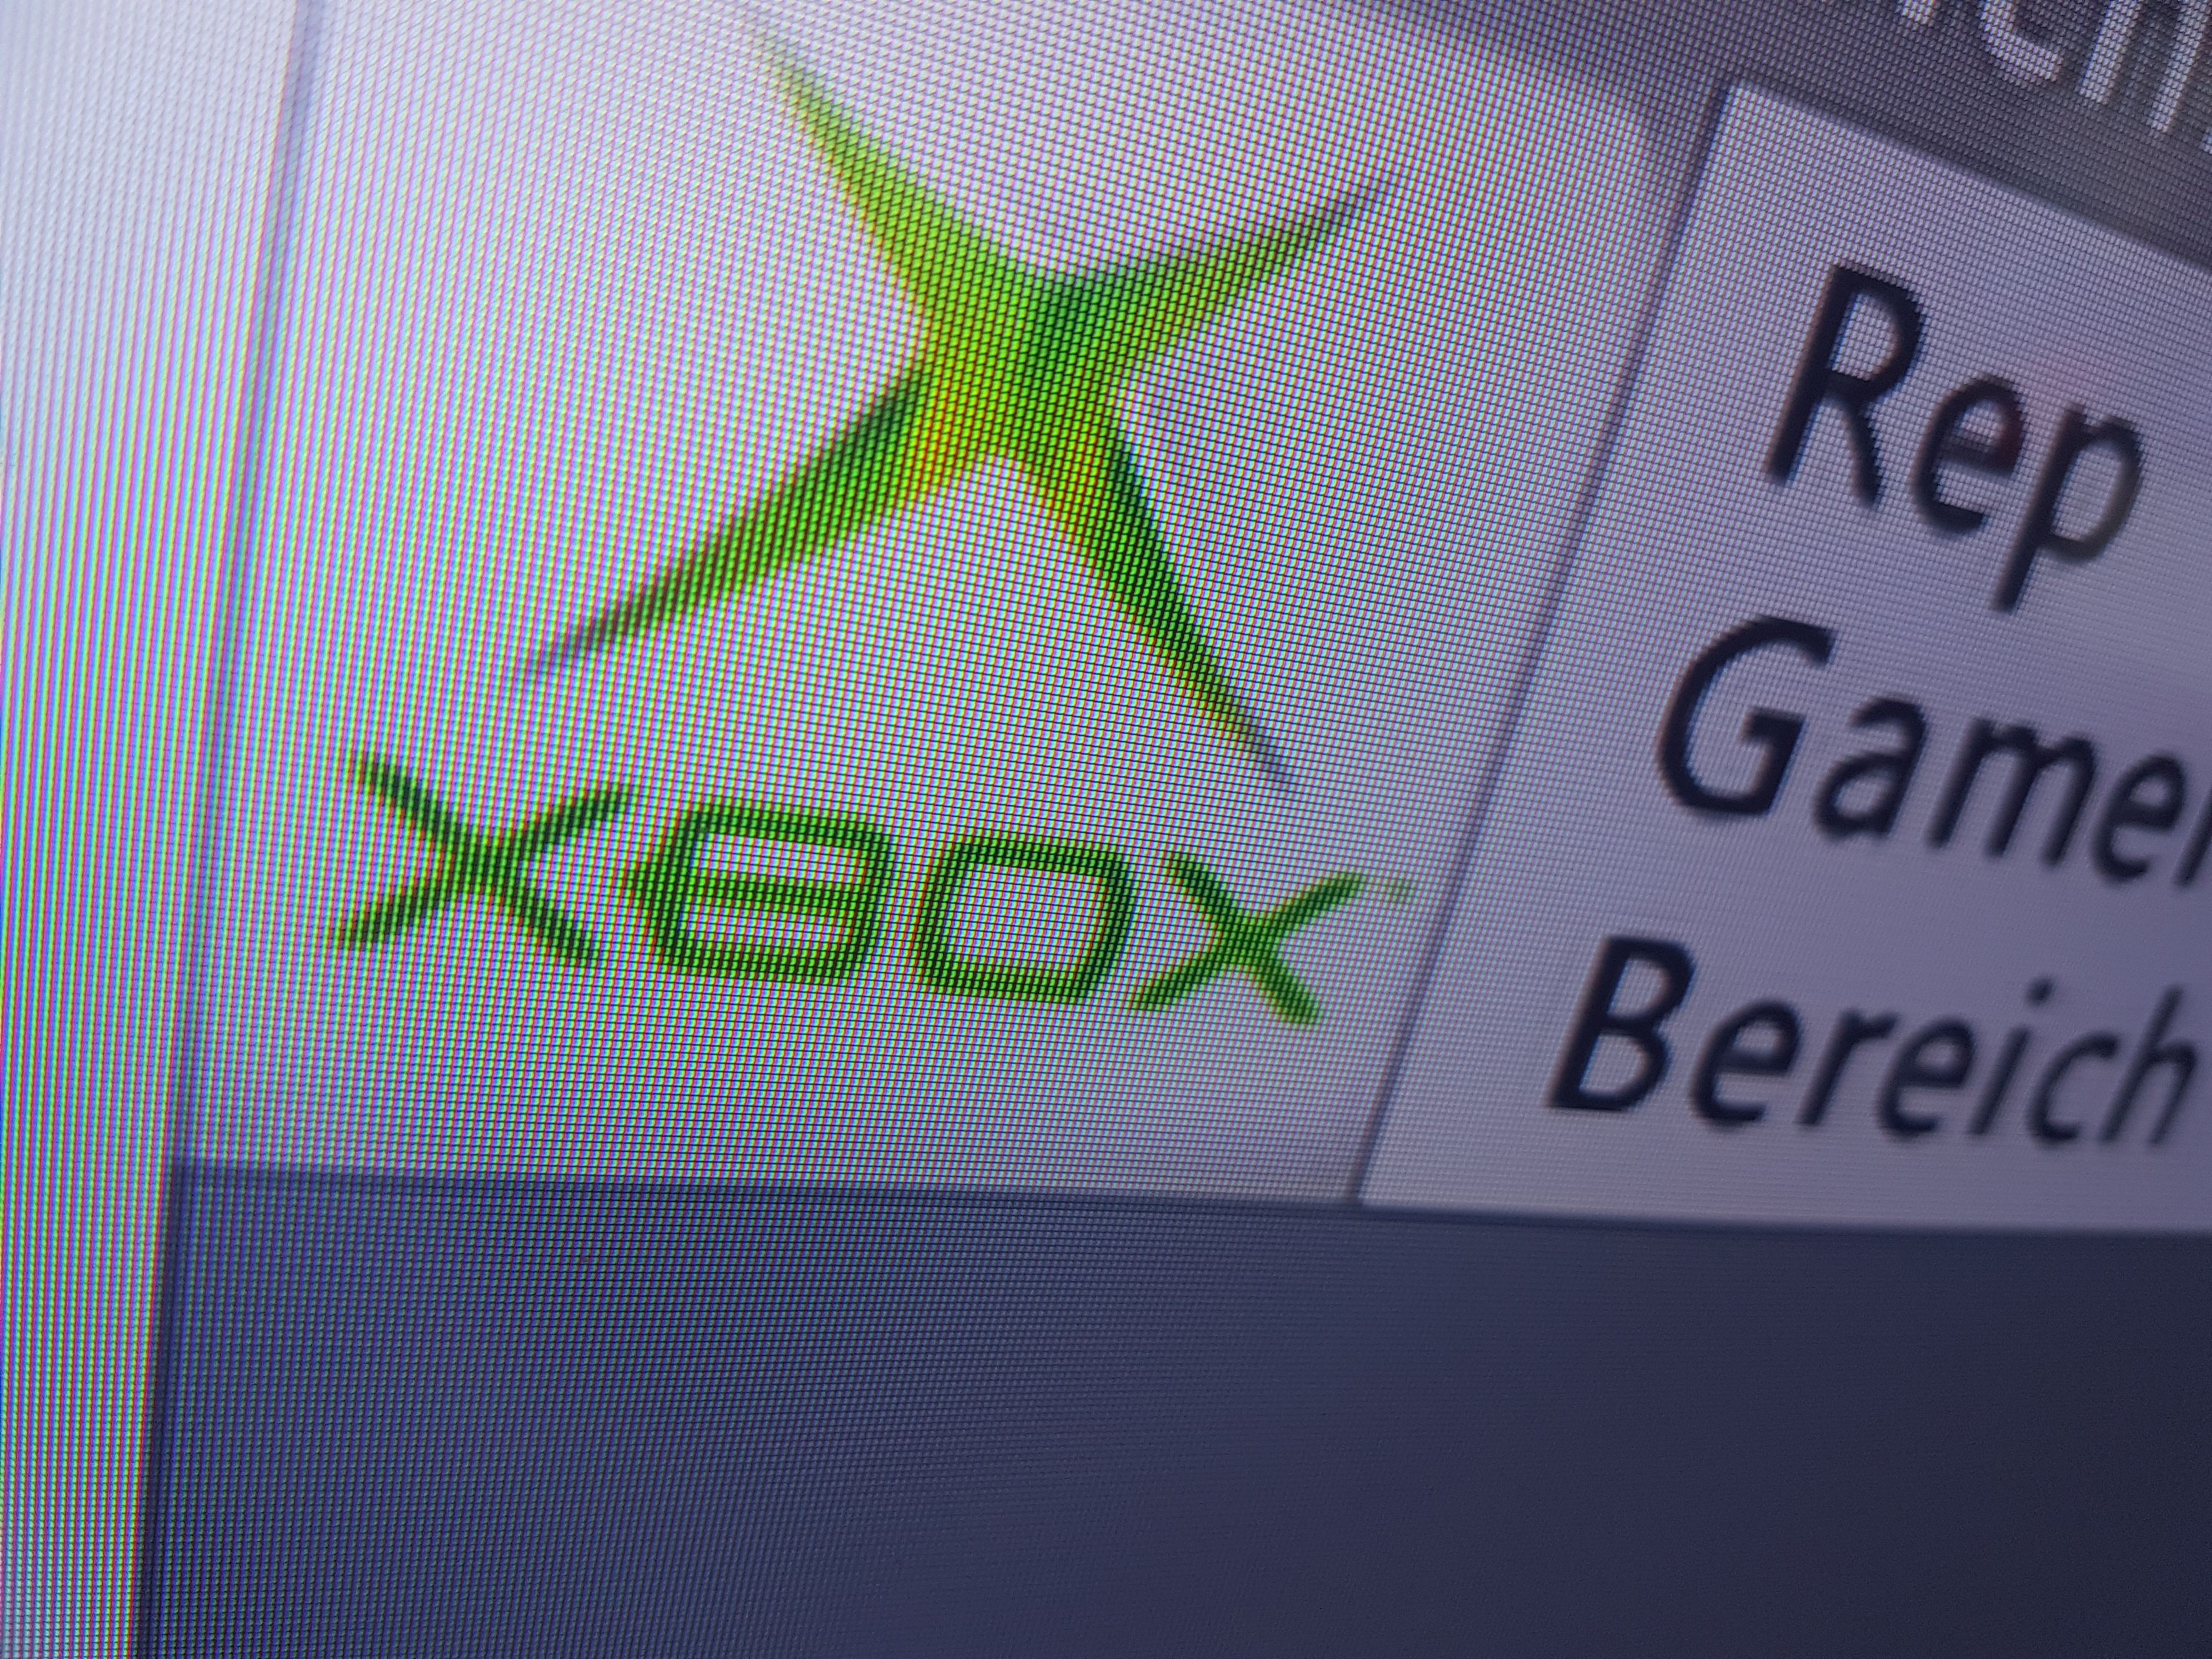 Upcoming Xbox Update Will Allow the Use of Xbox 360 Gamerpics On